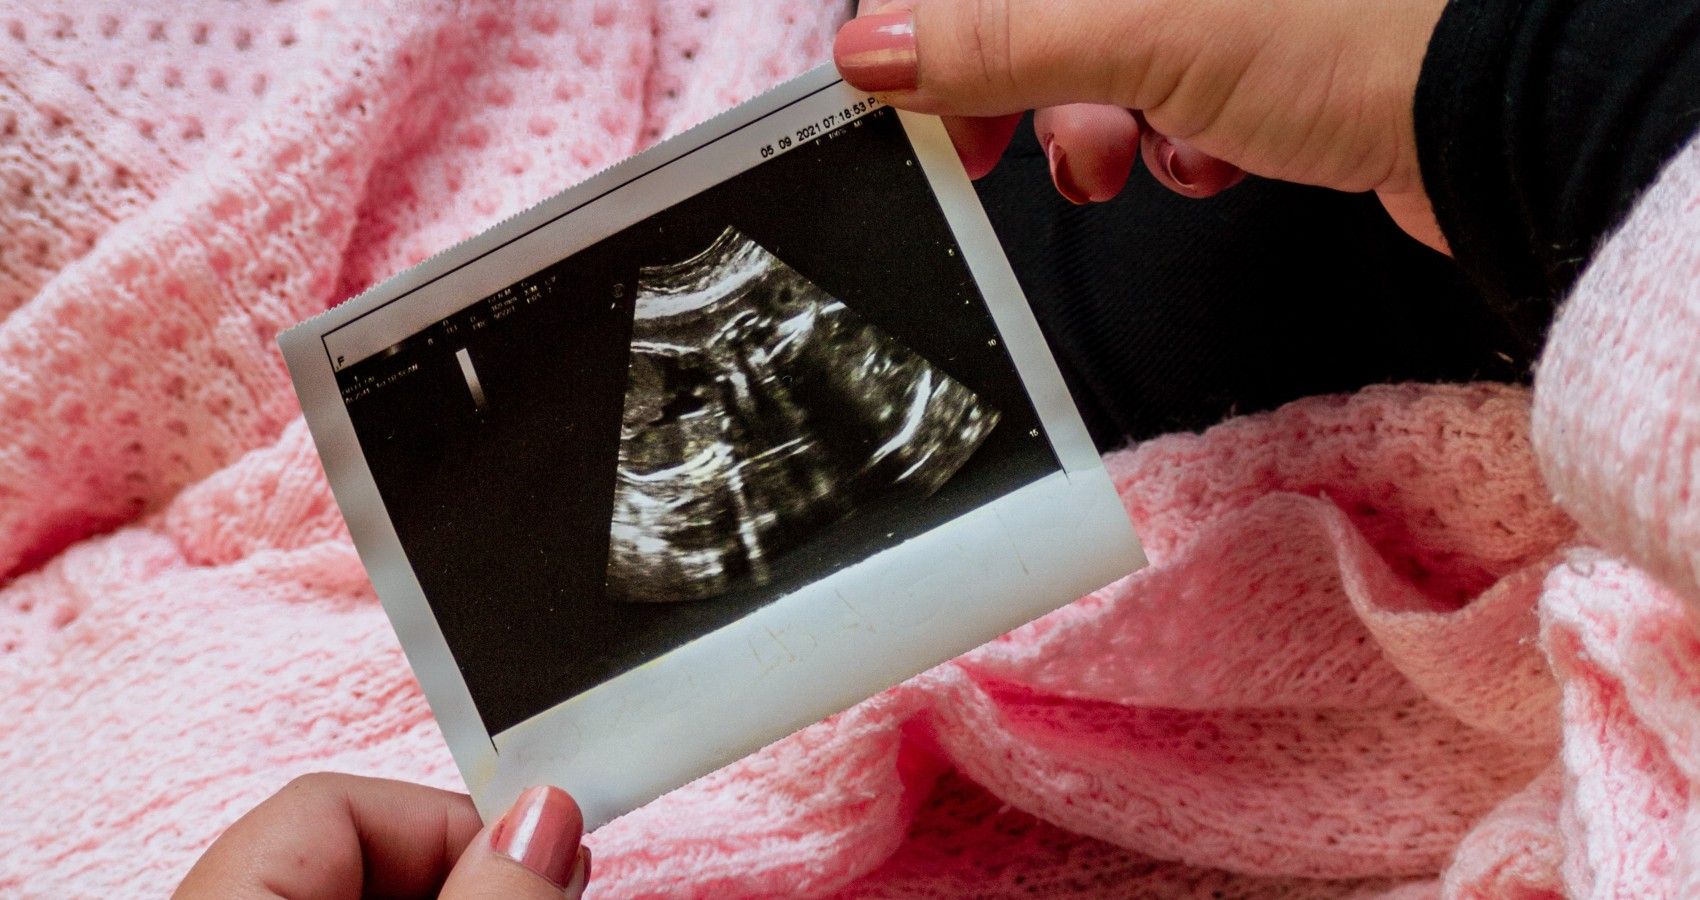 First Piece Of Concrete Evidence That Babies Taste & Smell In The Womb Has Been Uncovered